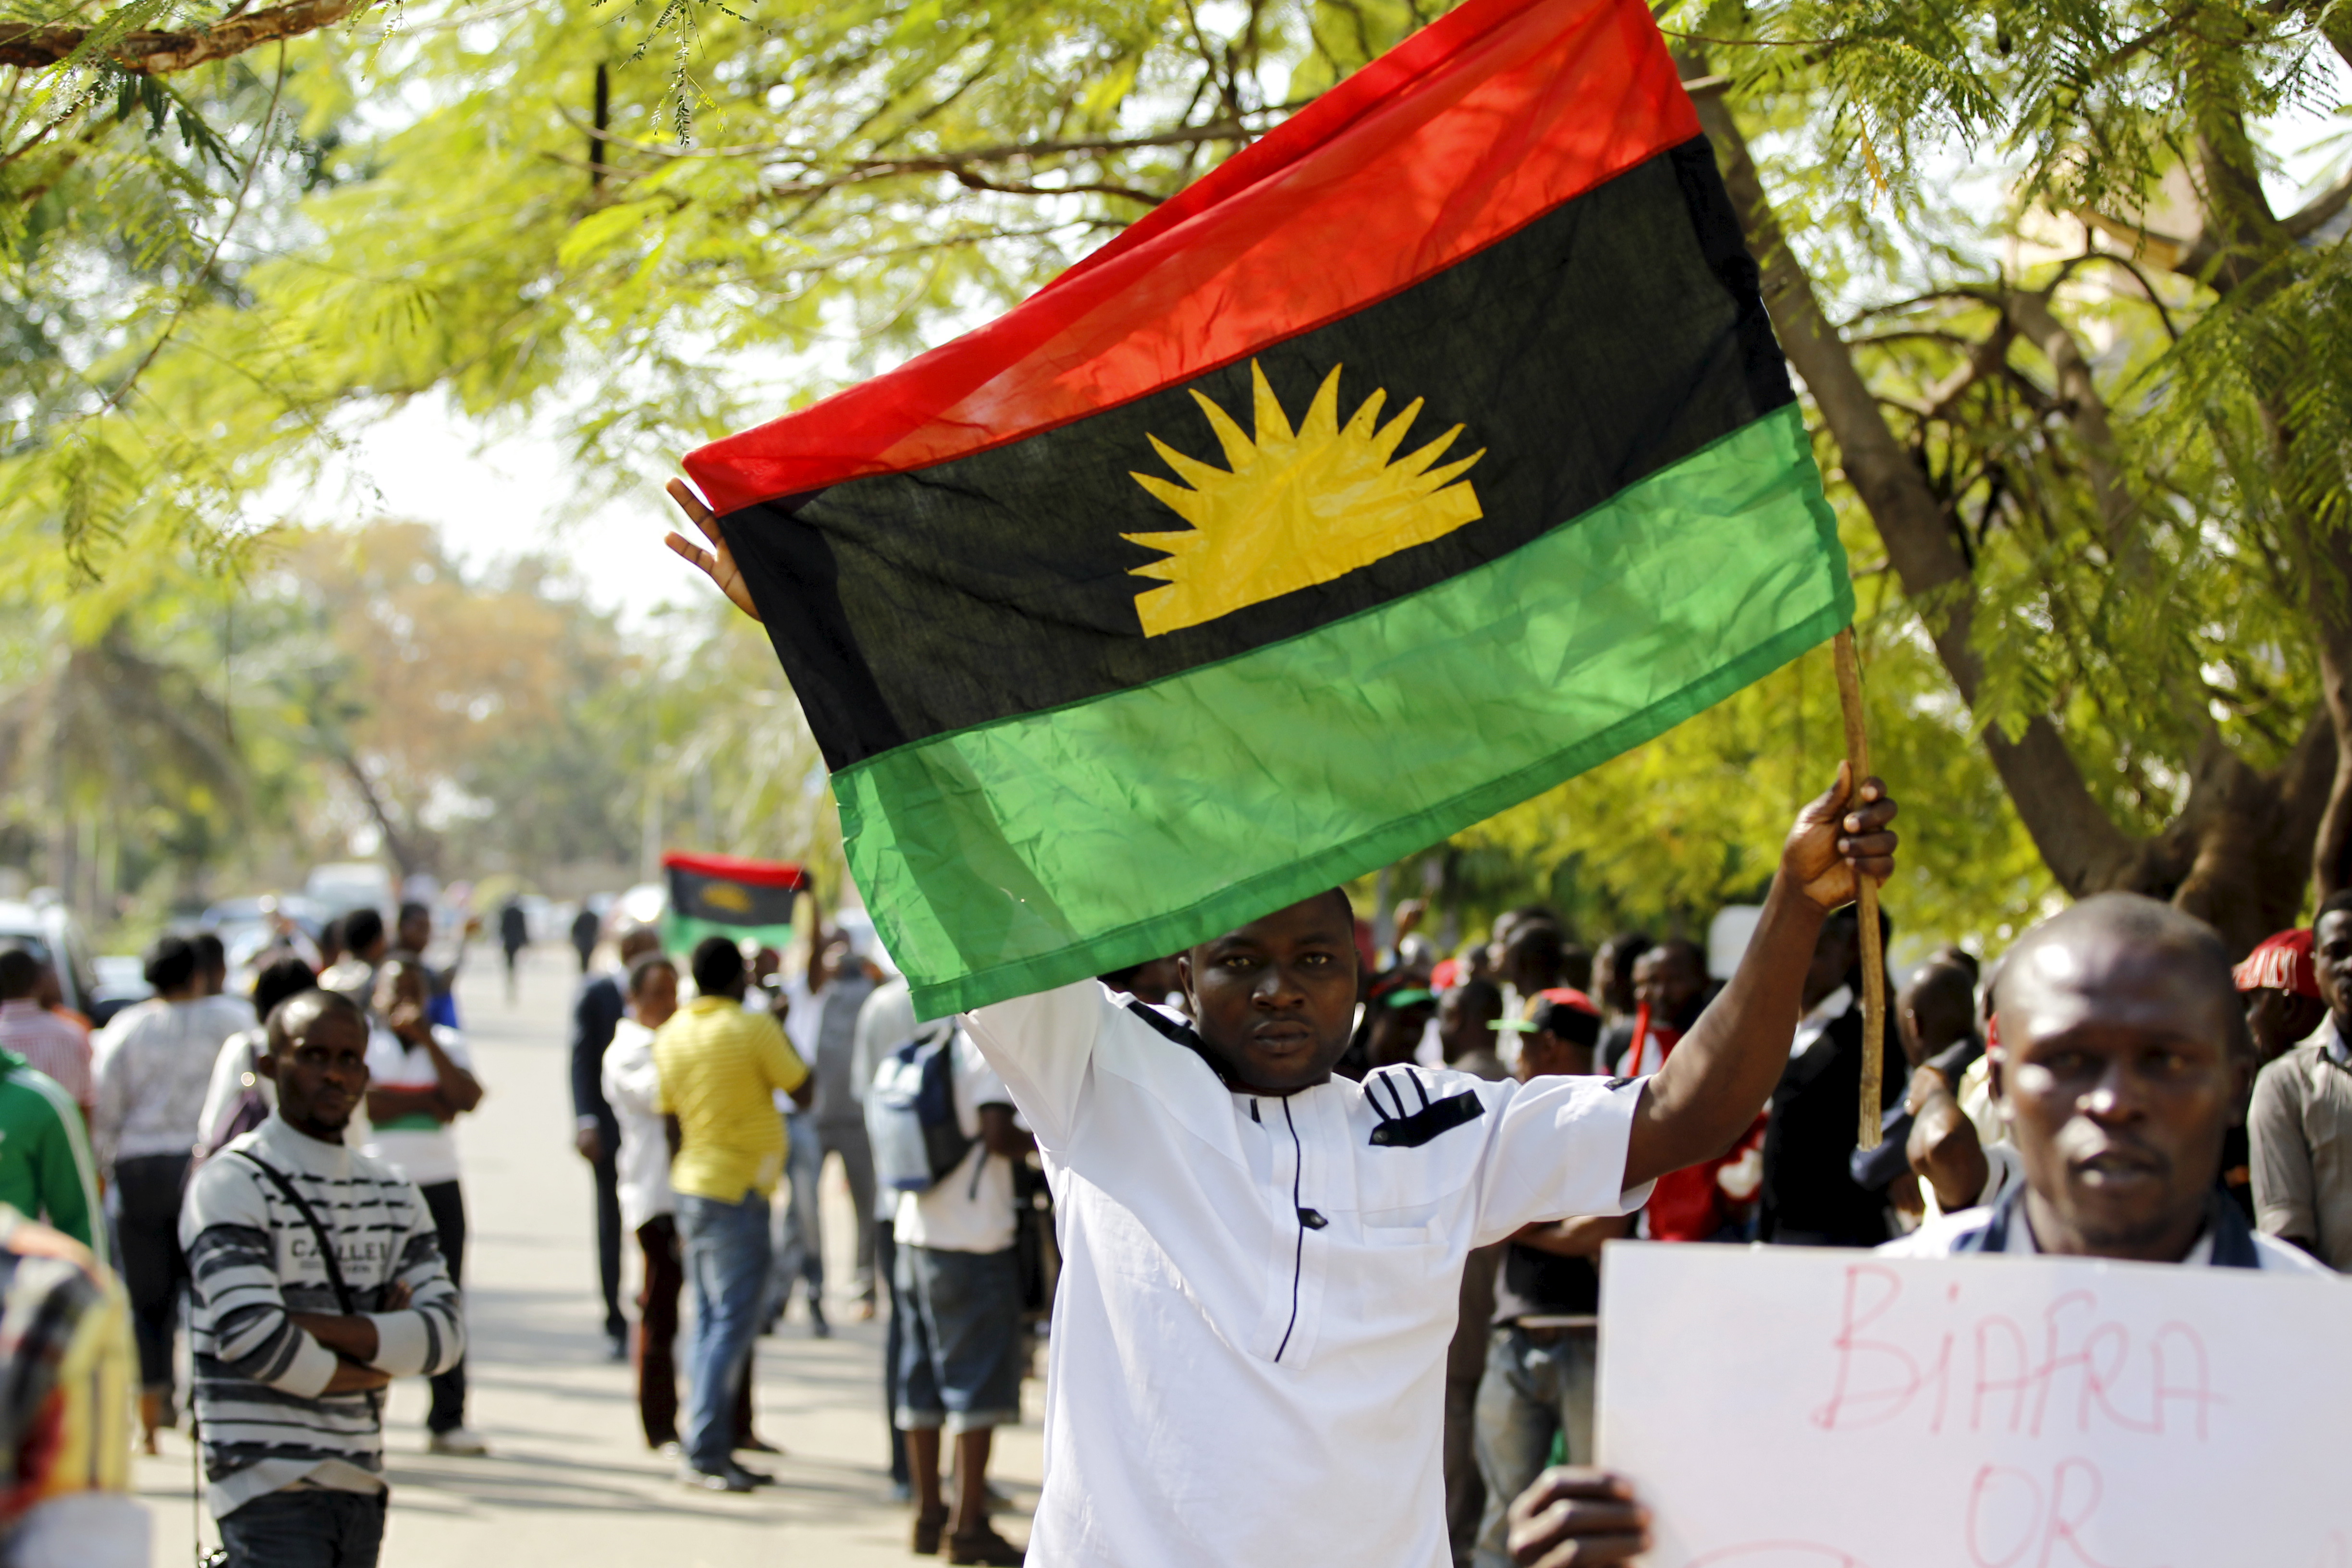 European Union reacts to call for Biafra secession